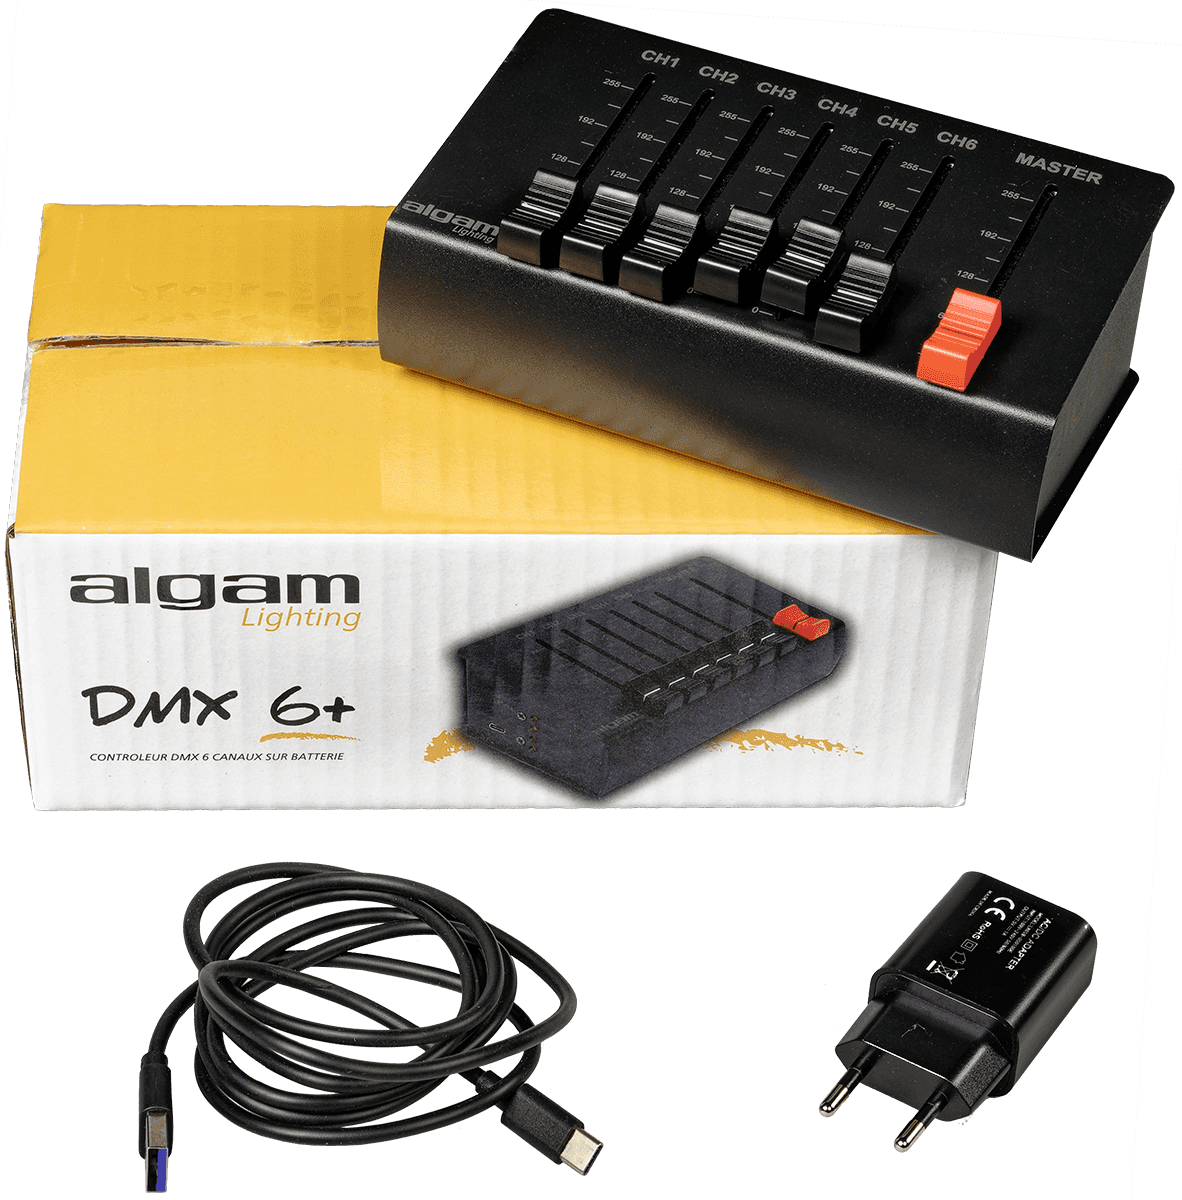 6-channel rechargeable lightning mixer